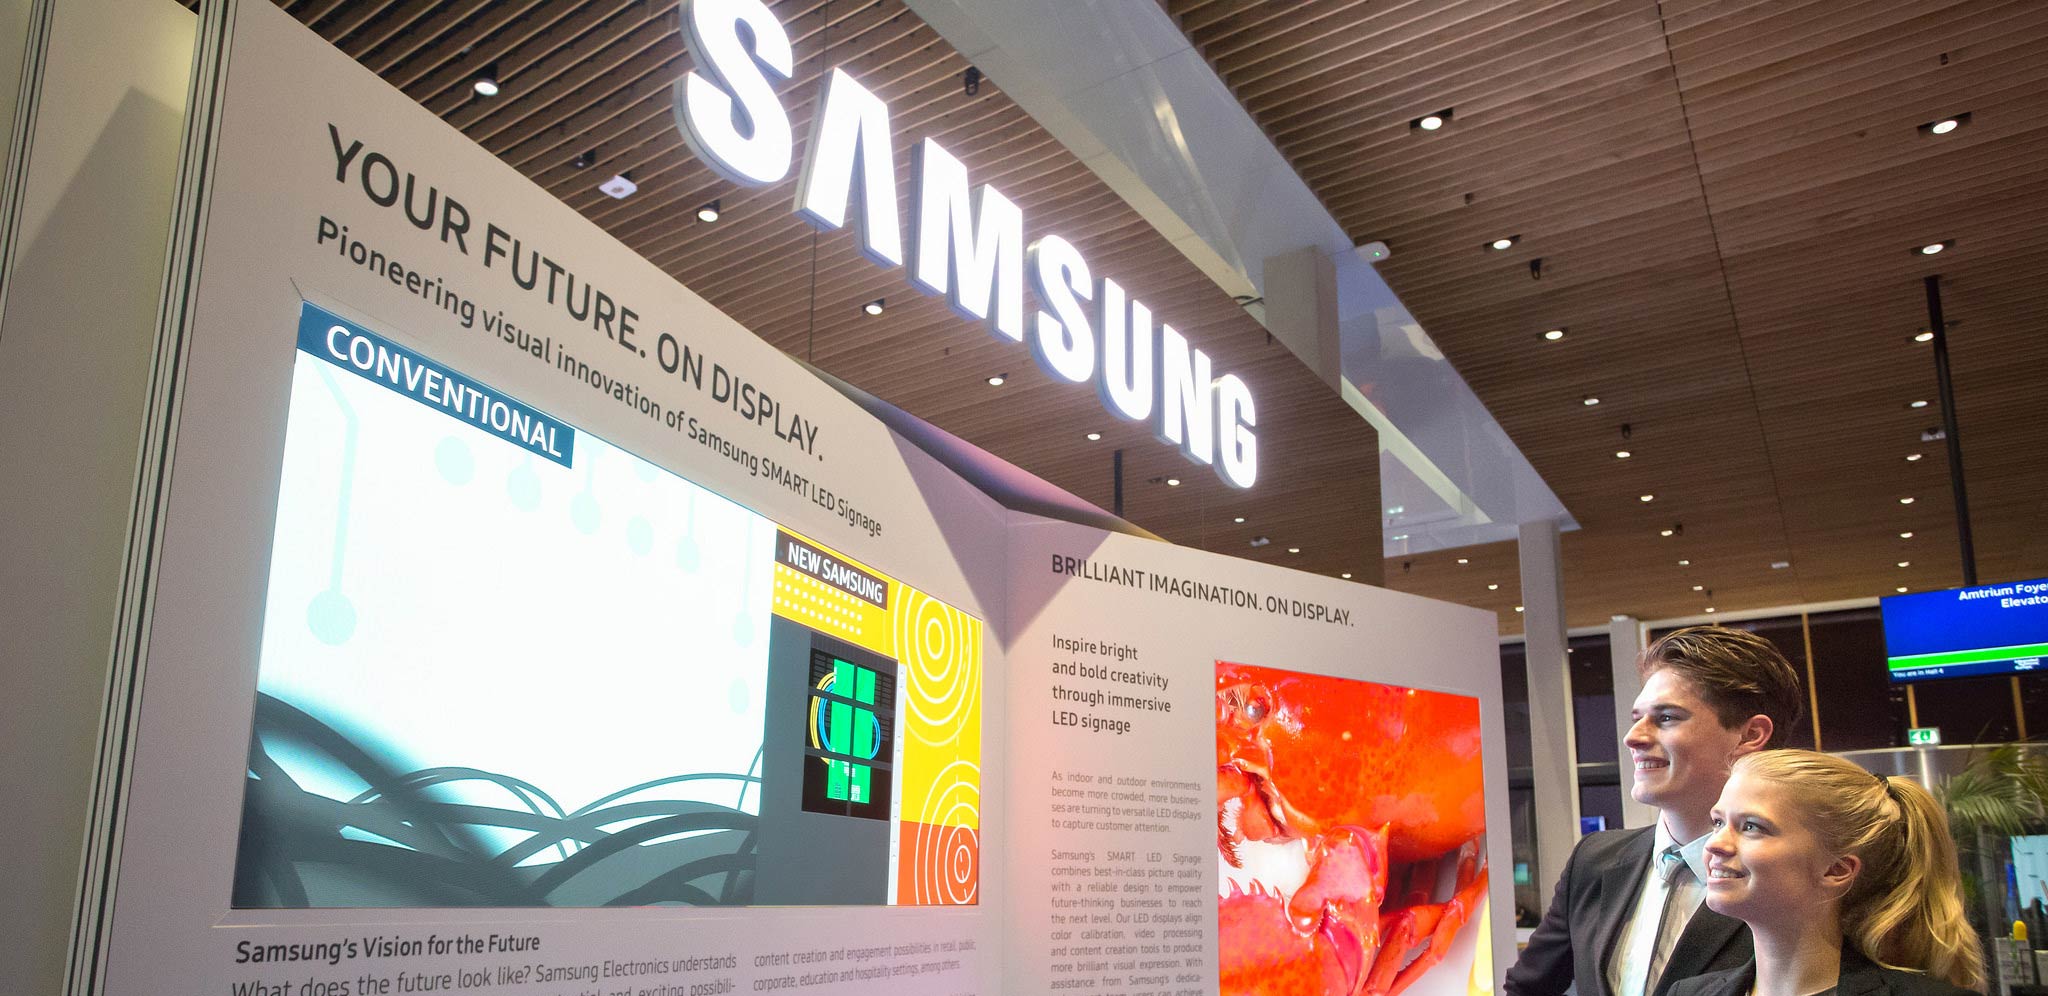 Image of Samsung store